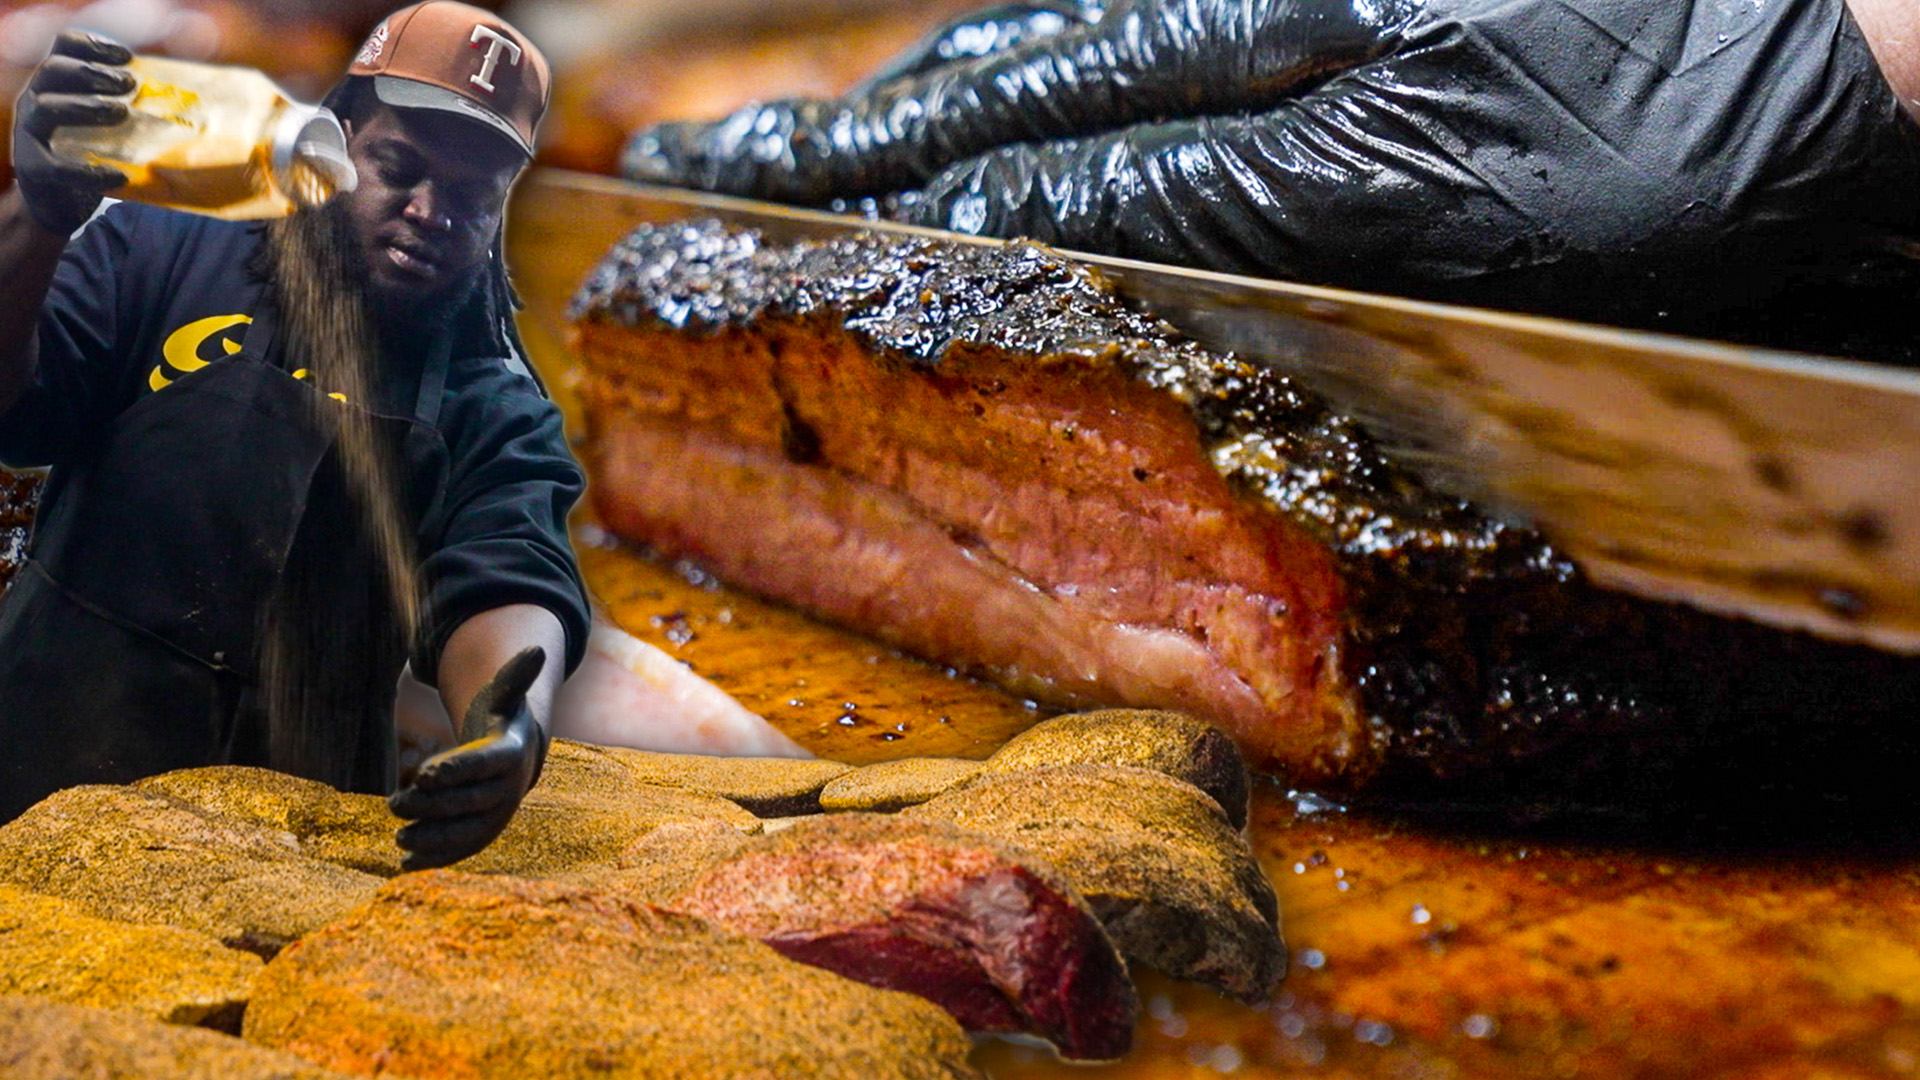 Close-up of a knife slicing through tender brisket; a man superimposed on the left pours seasoning on a cut of meat.